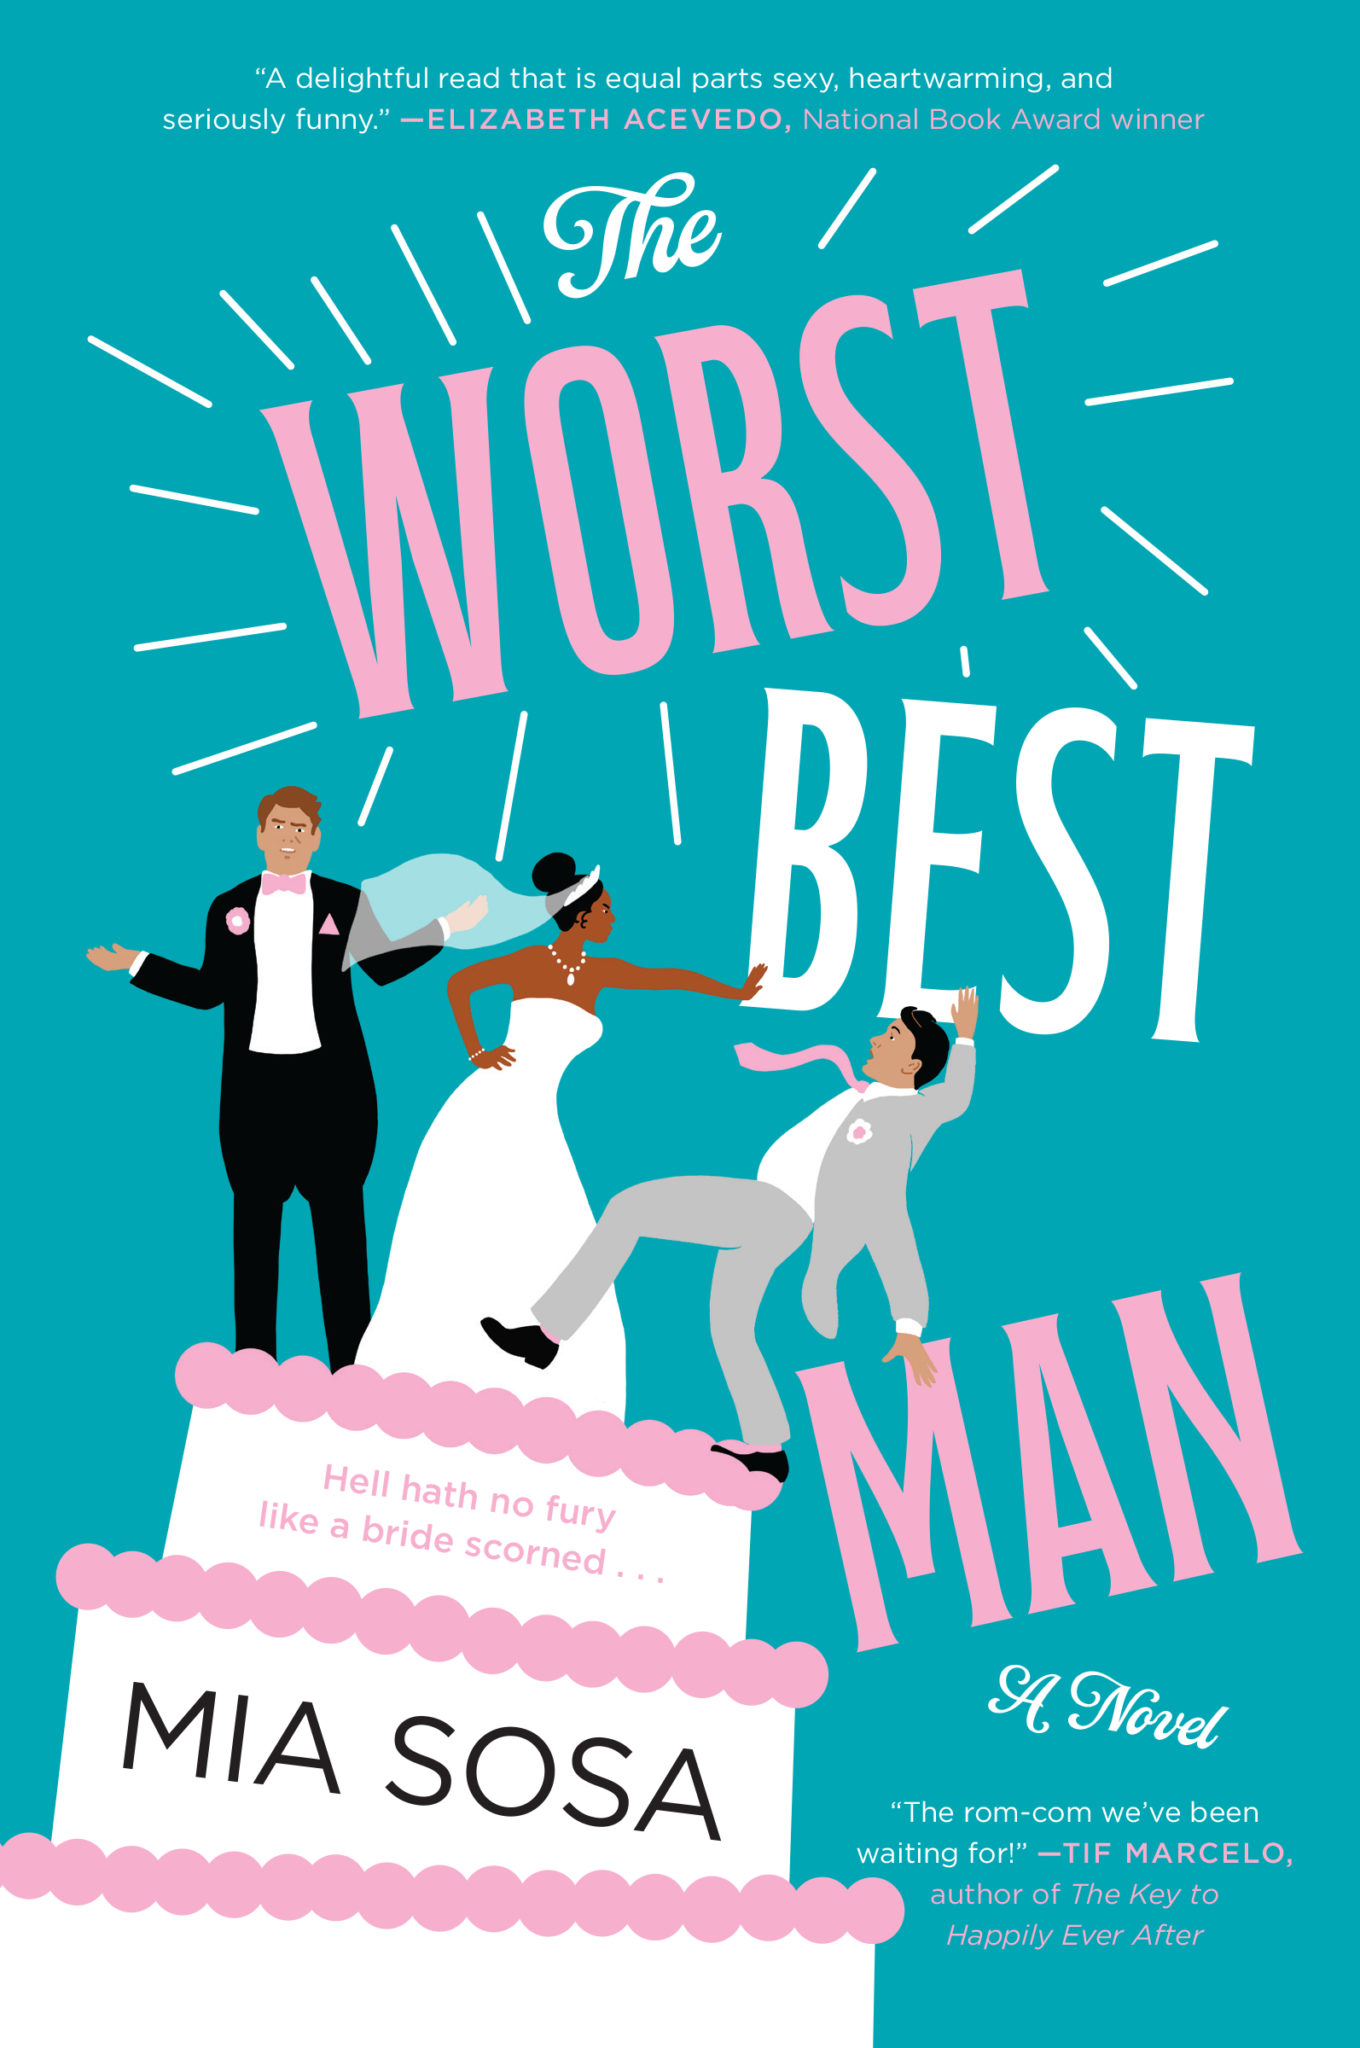 The Worst Best Man by Mia Sosa book review